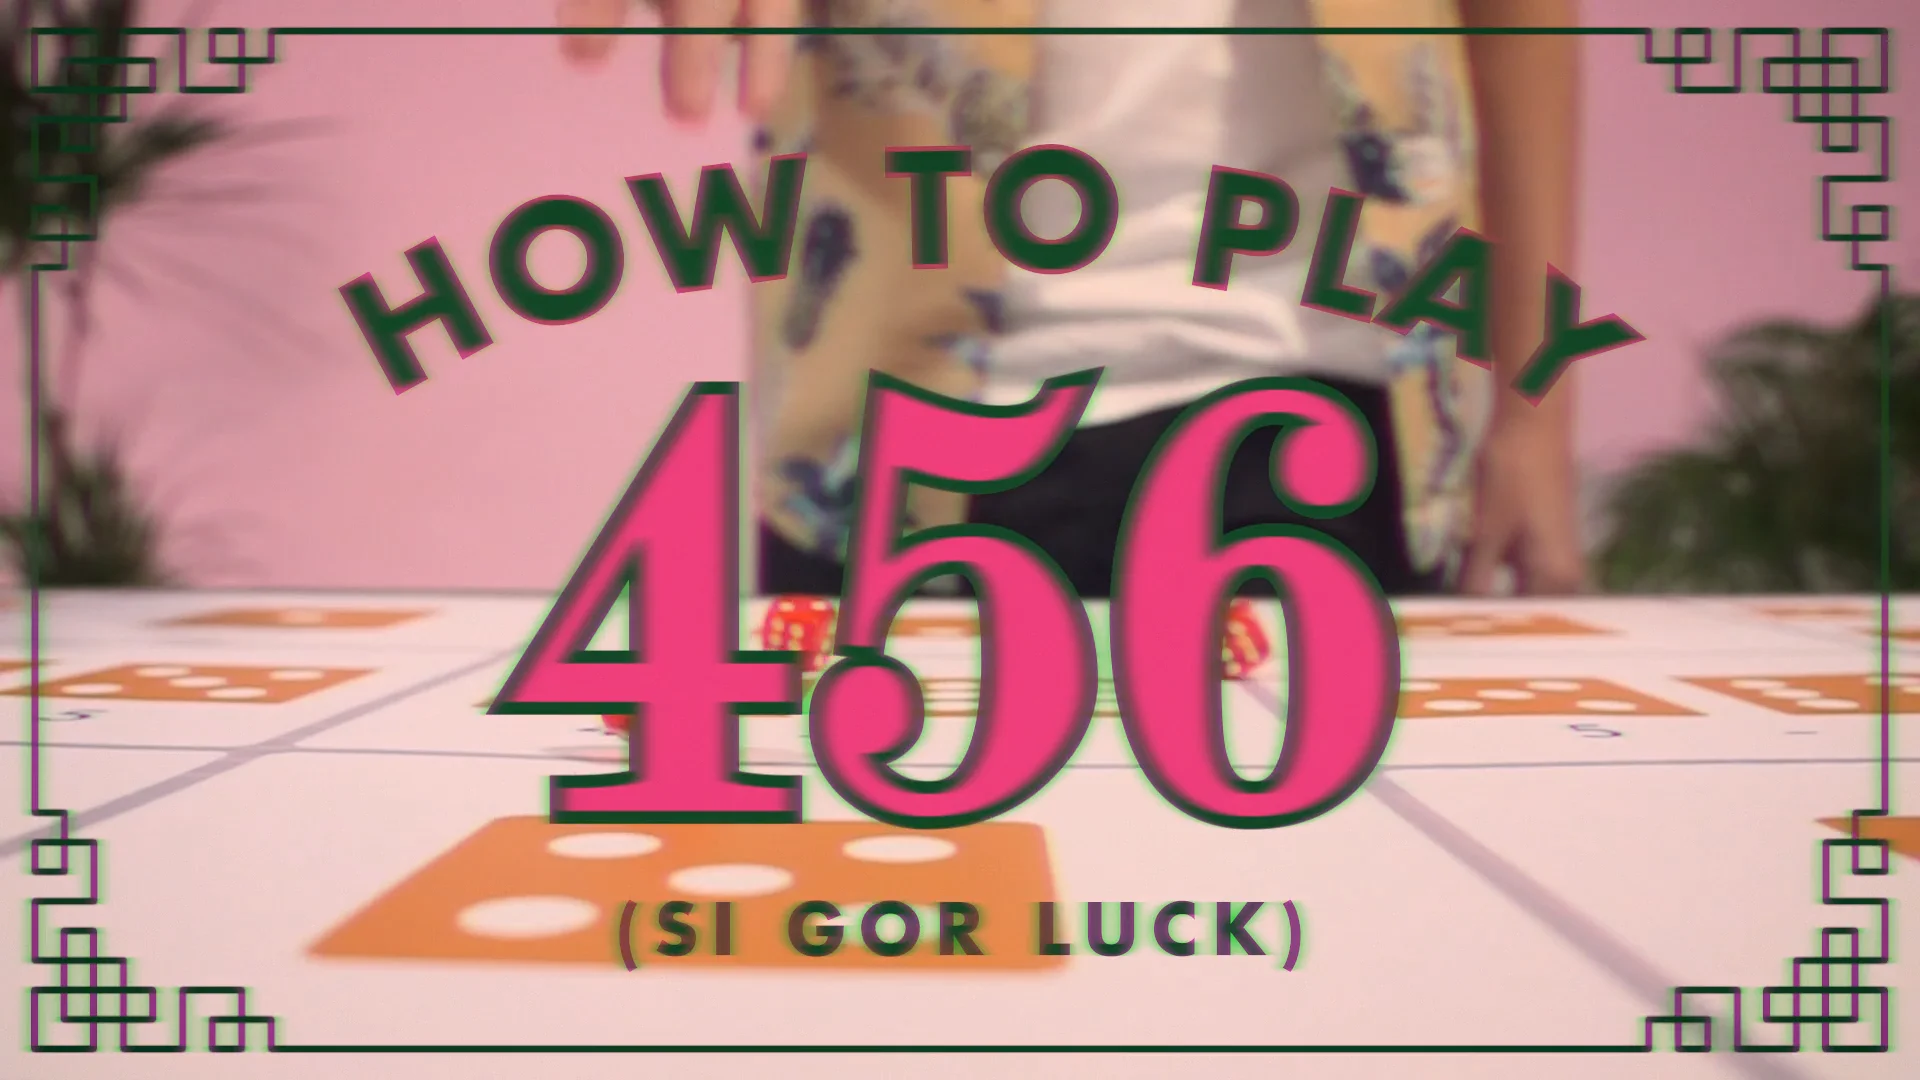 mongrel-how-to-play-4-5-6-si-gor-luck-on-vimeo